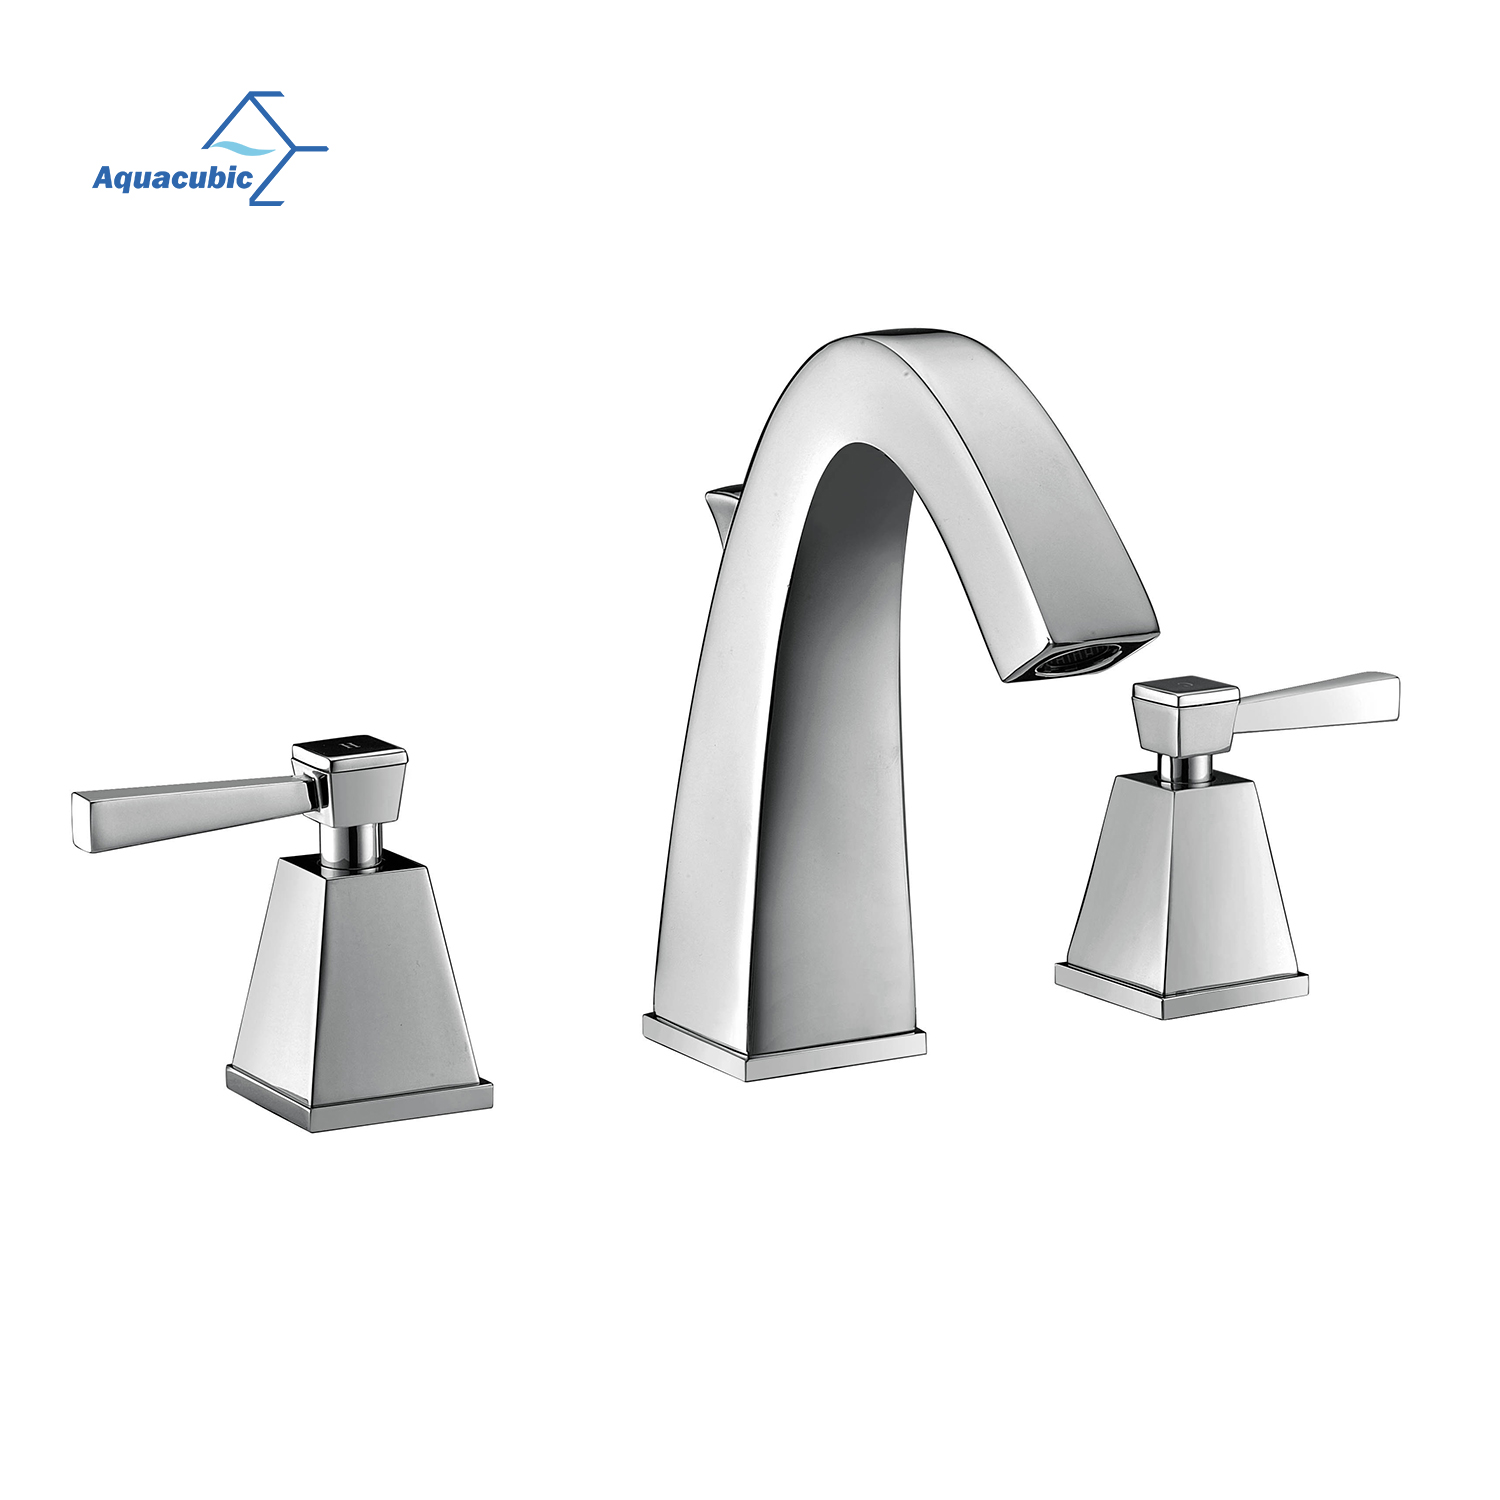 High-Ranking Brass Body Faucets Mixers Taps, Double Handle polished Chrome Bathroom sink Faucet